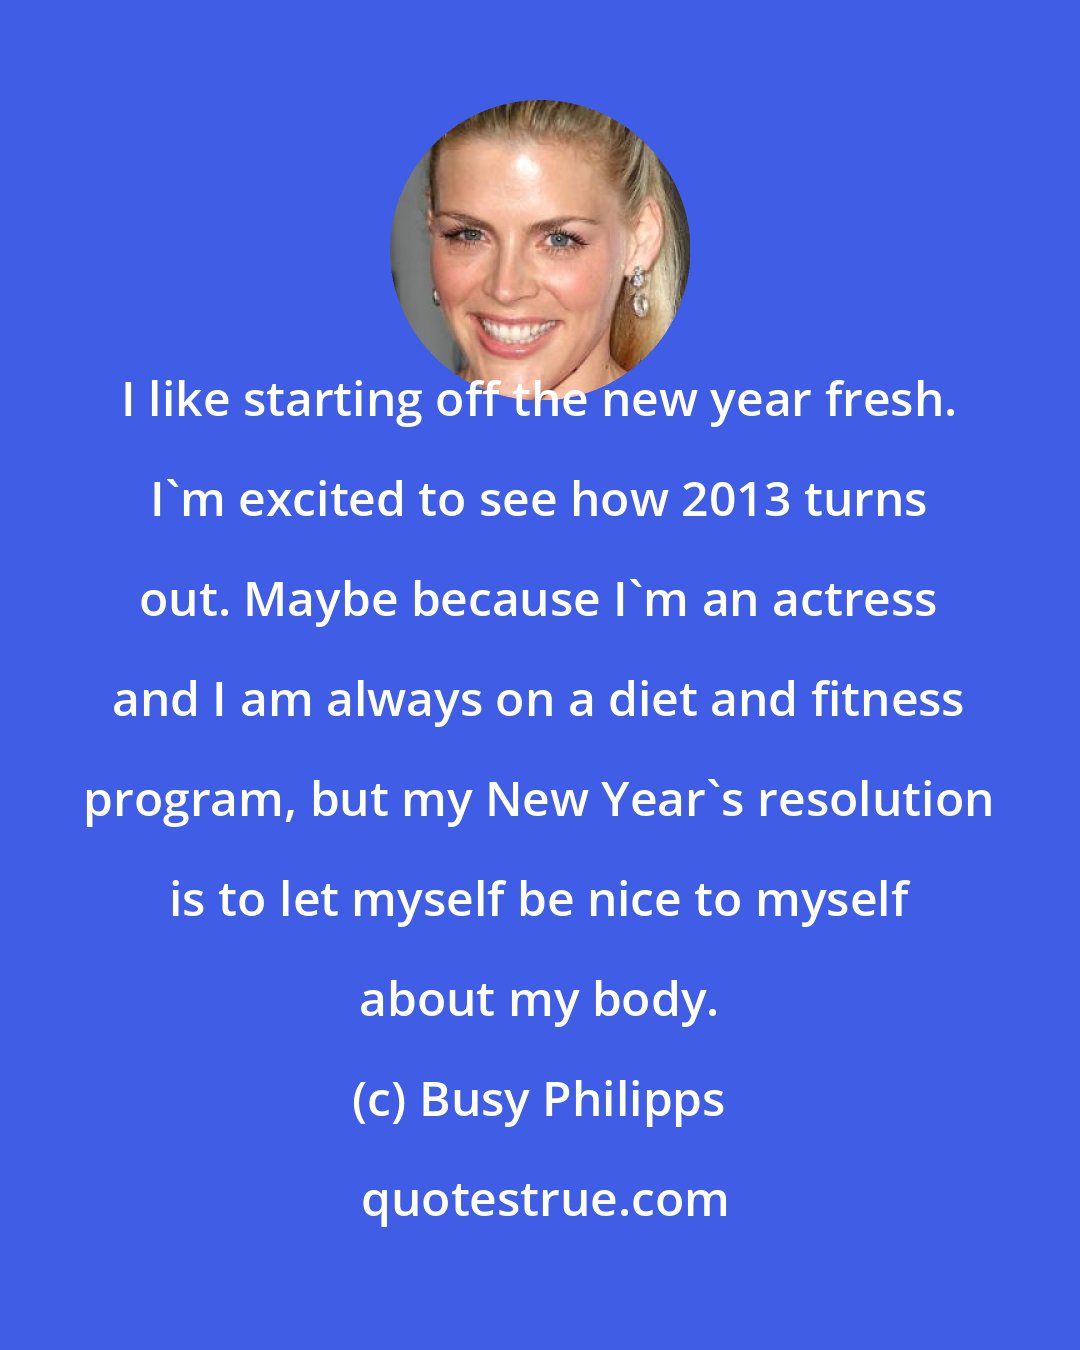 Busy Philipps: I like starting off the new year fresh. I'm excited to see how 2013 turns out. Maybe because I'm an actress and I am always on a diet and fitness program, but my New Year's resolution is to let myself be nice to myself about my body.